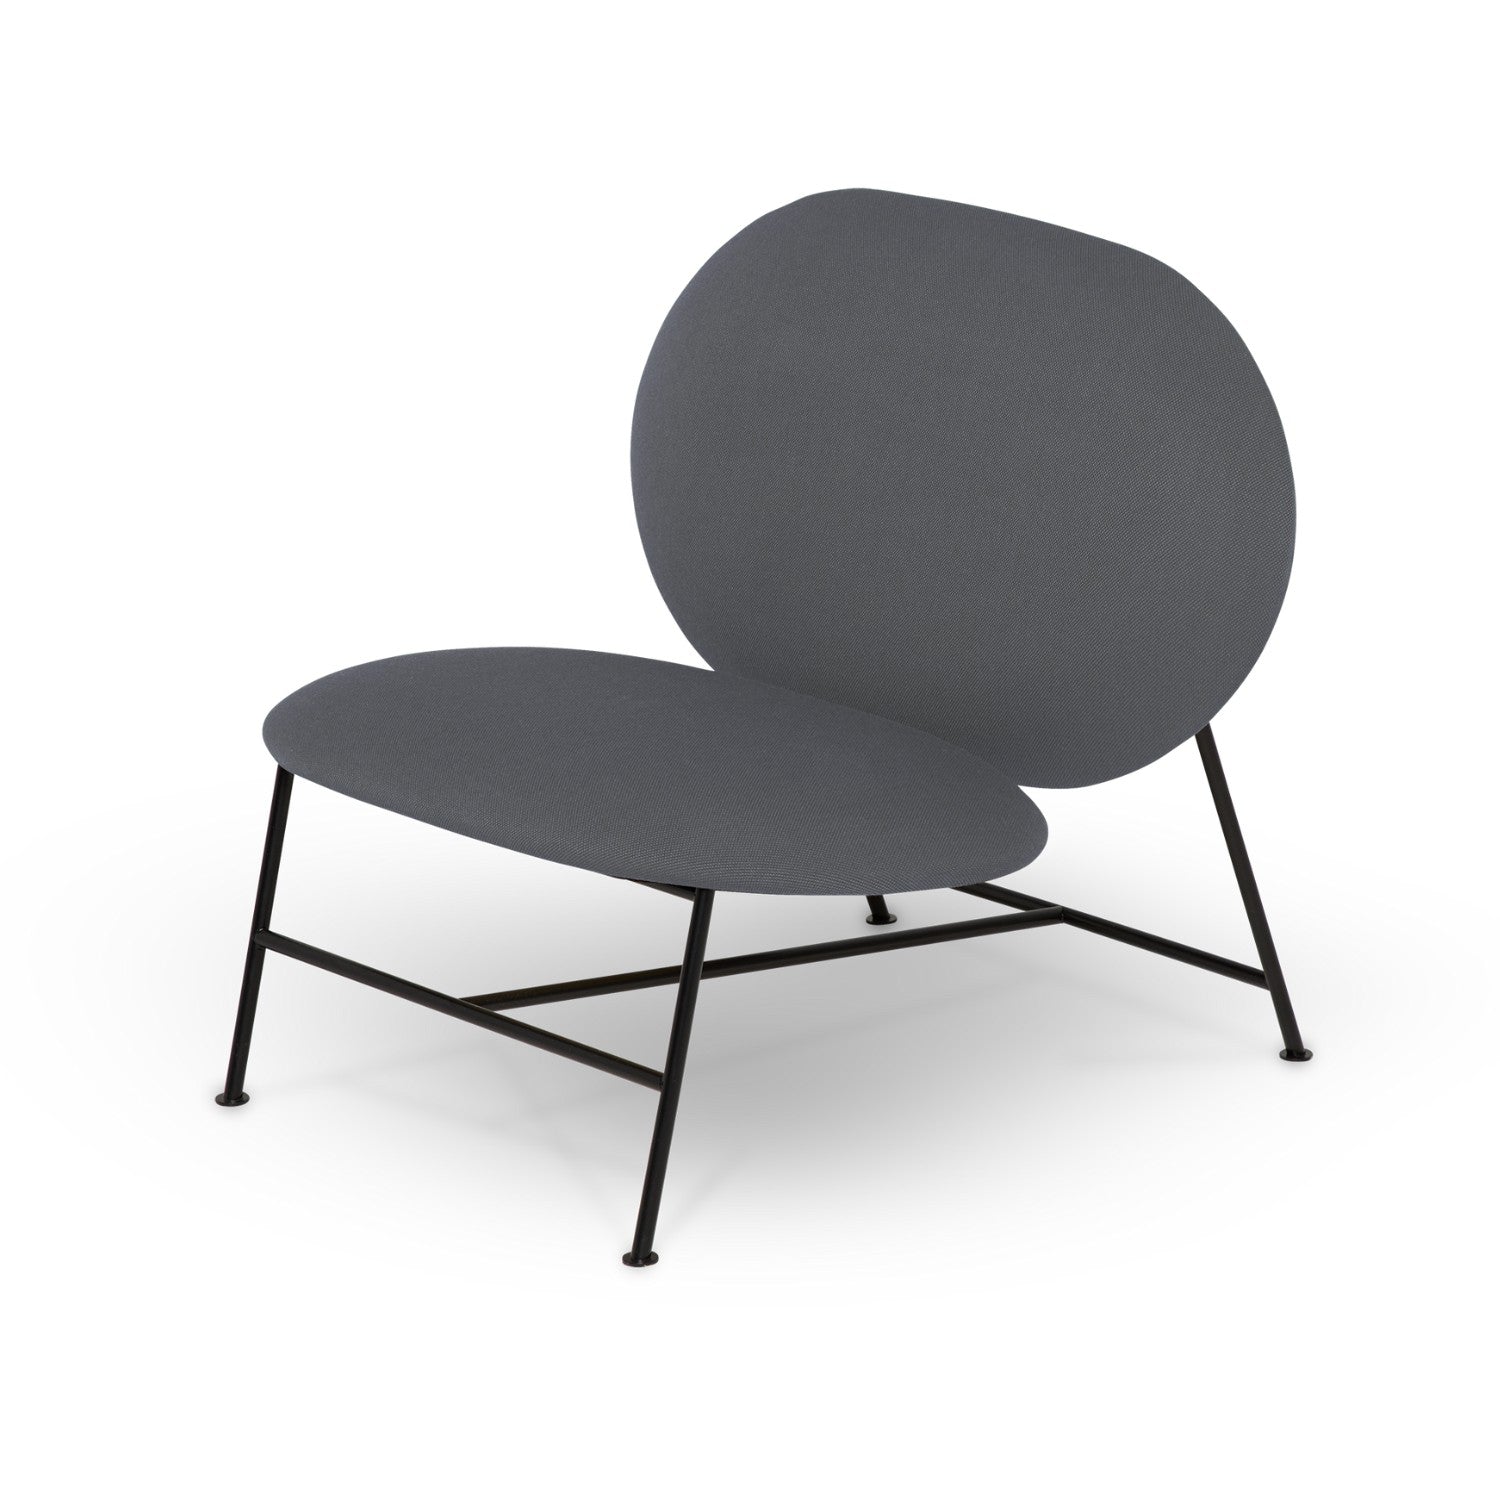 OBLONG - Lounge Chair